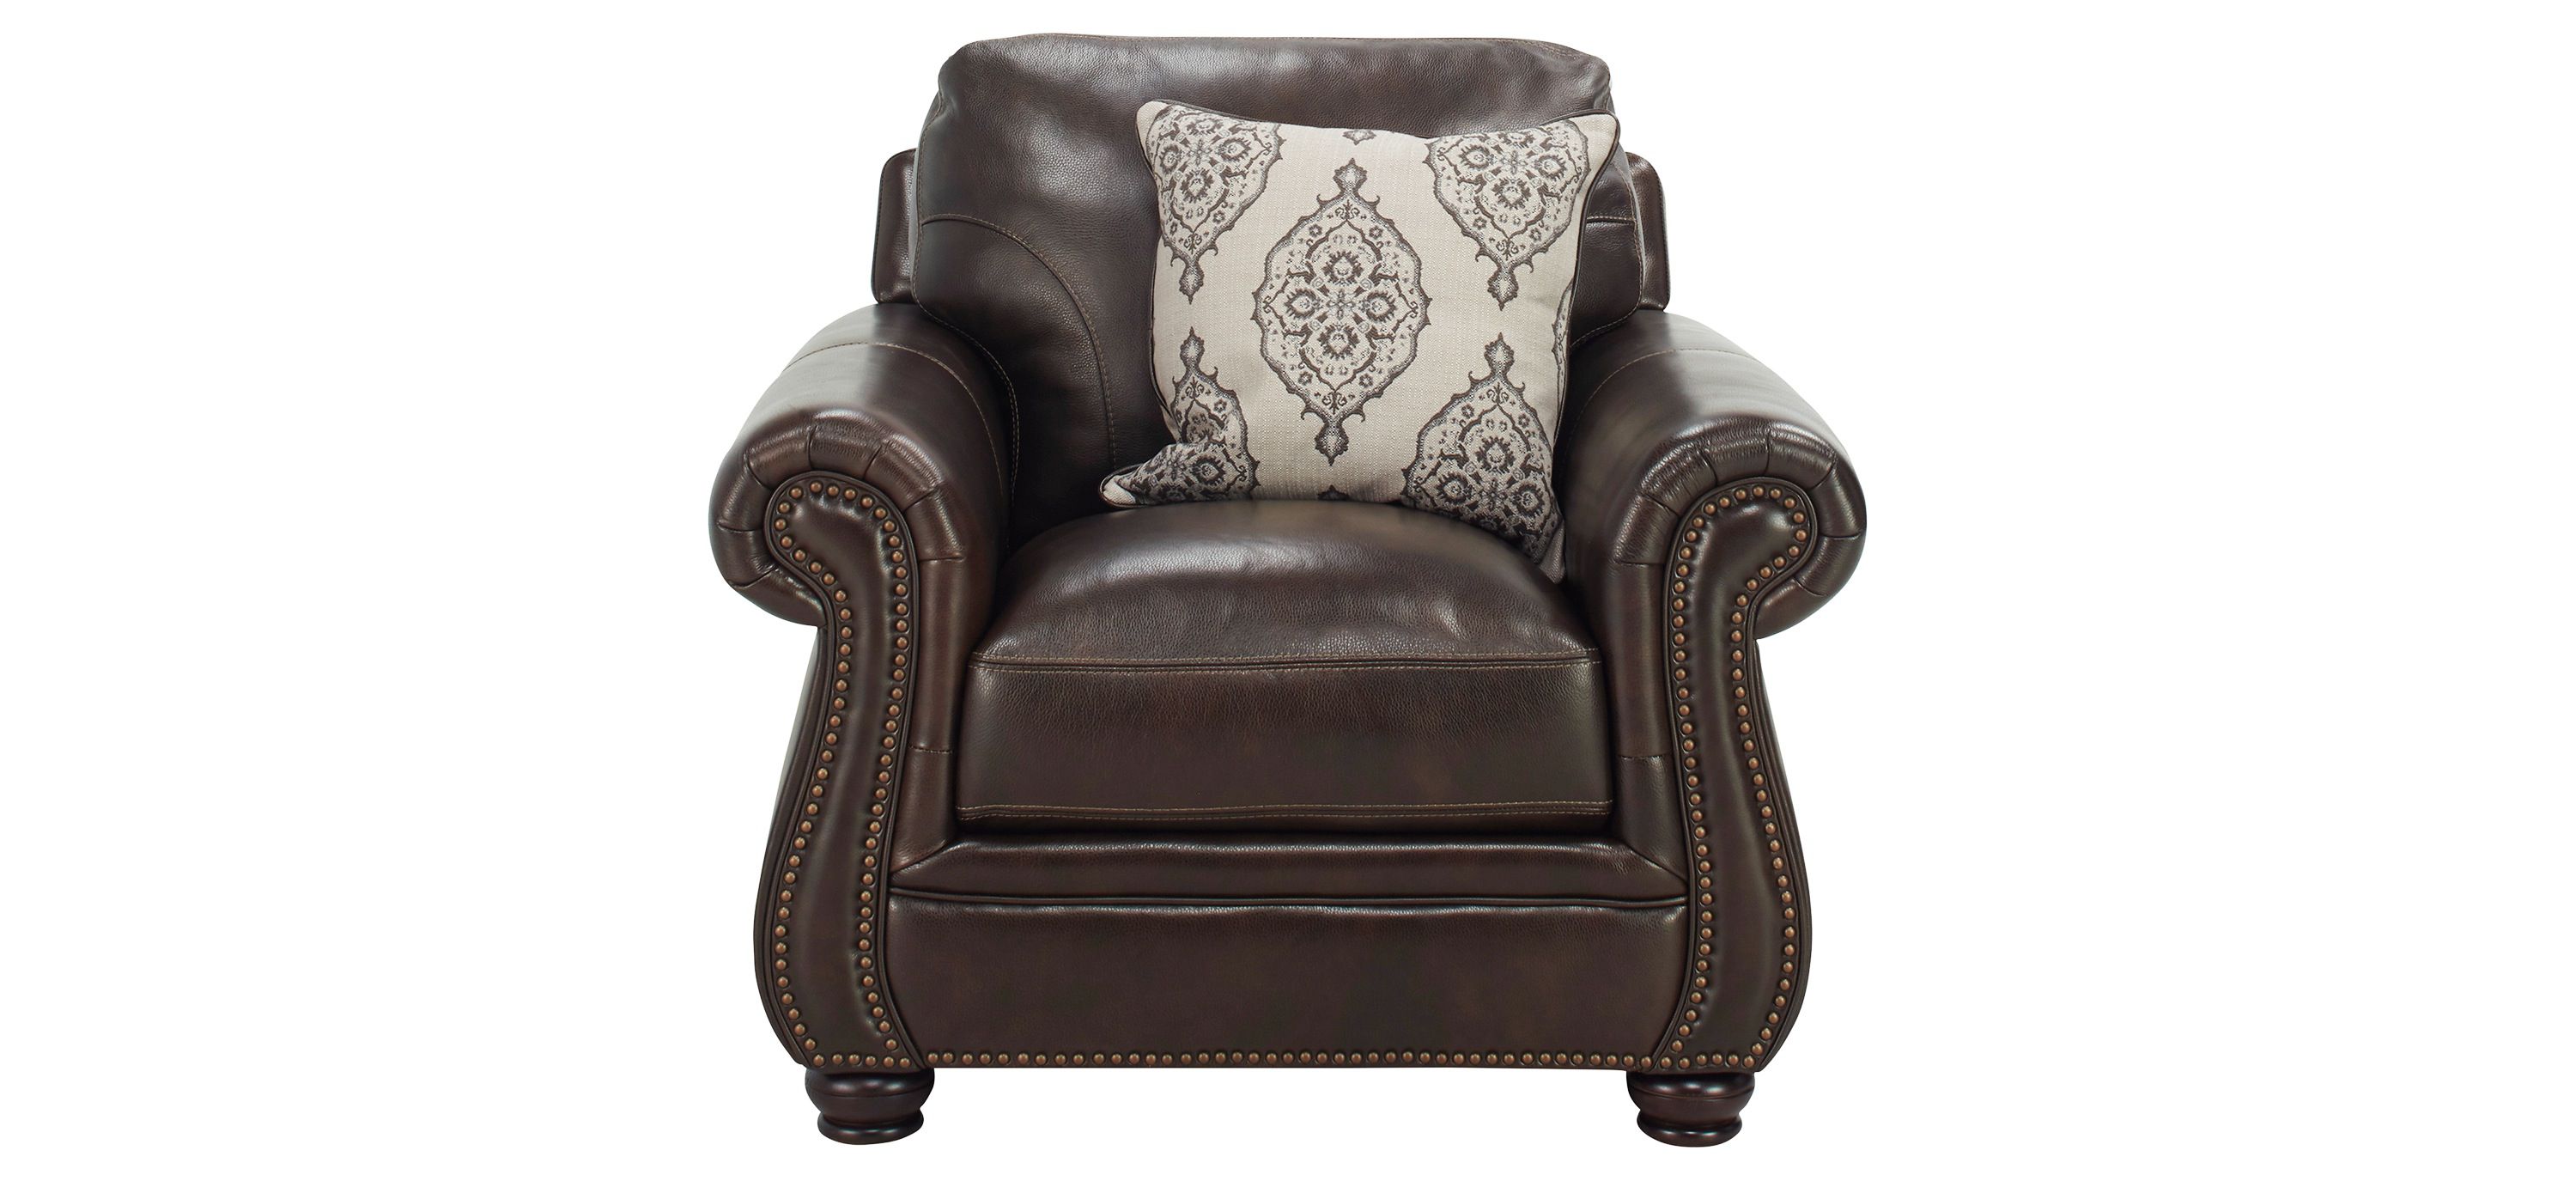 Alistair Leather Chair